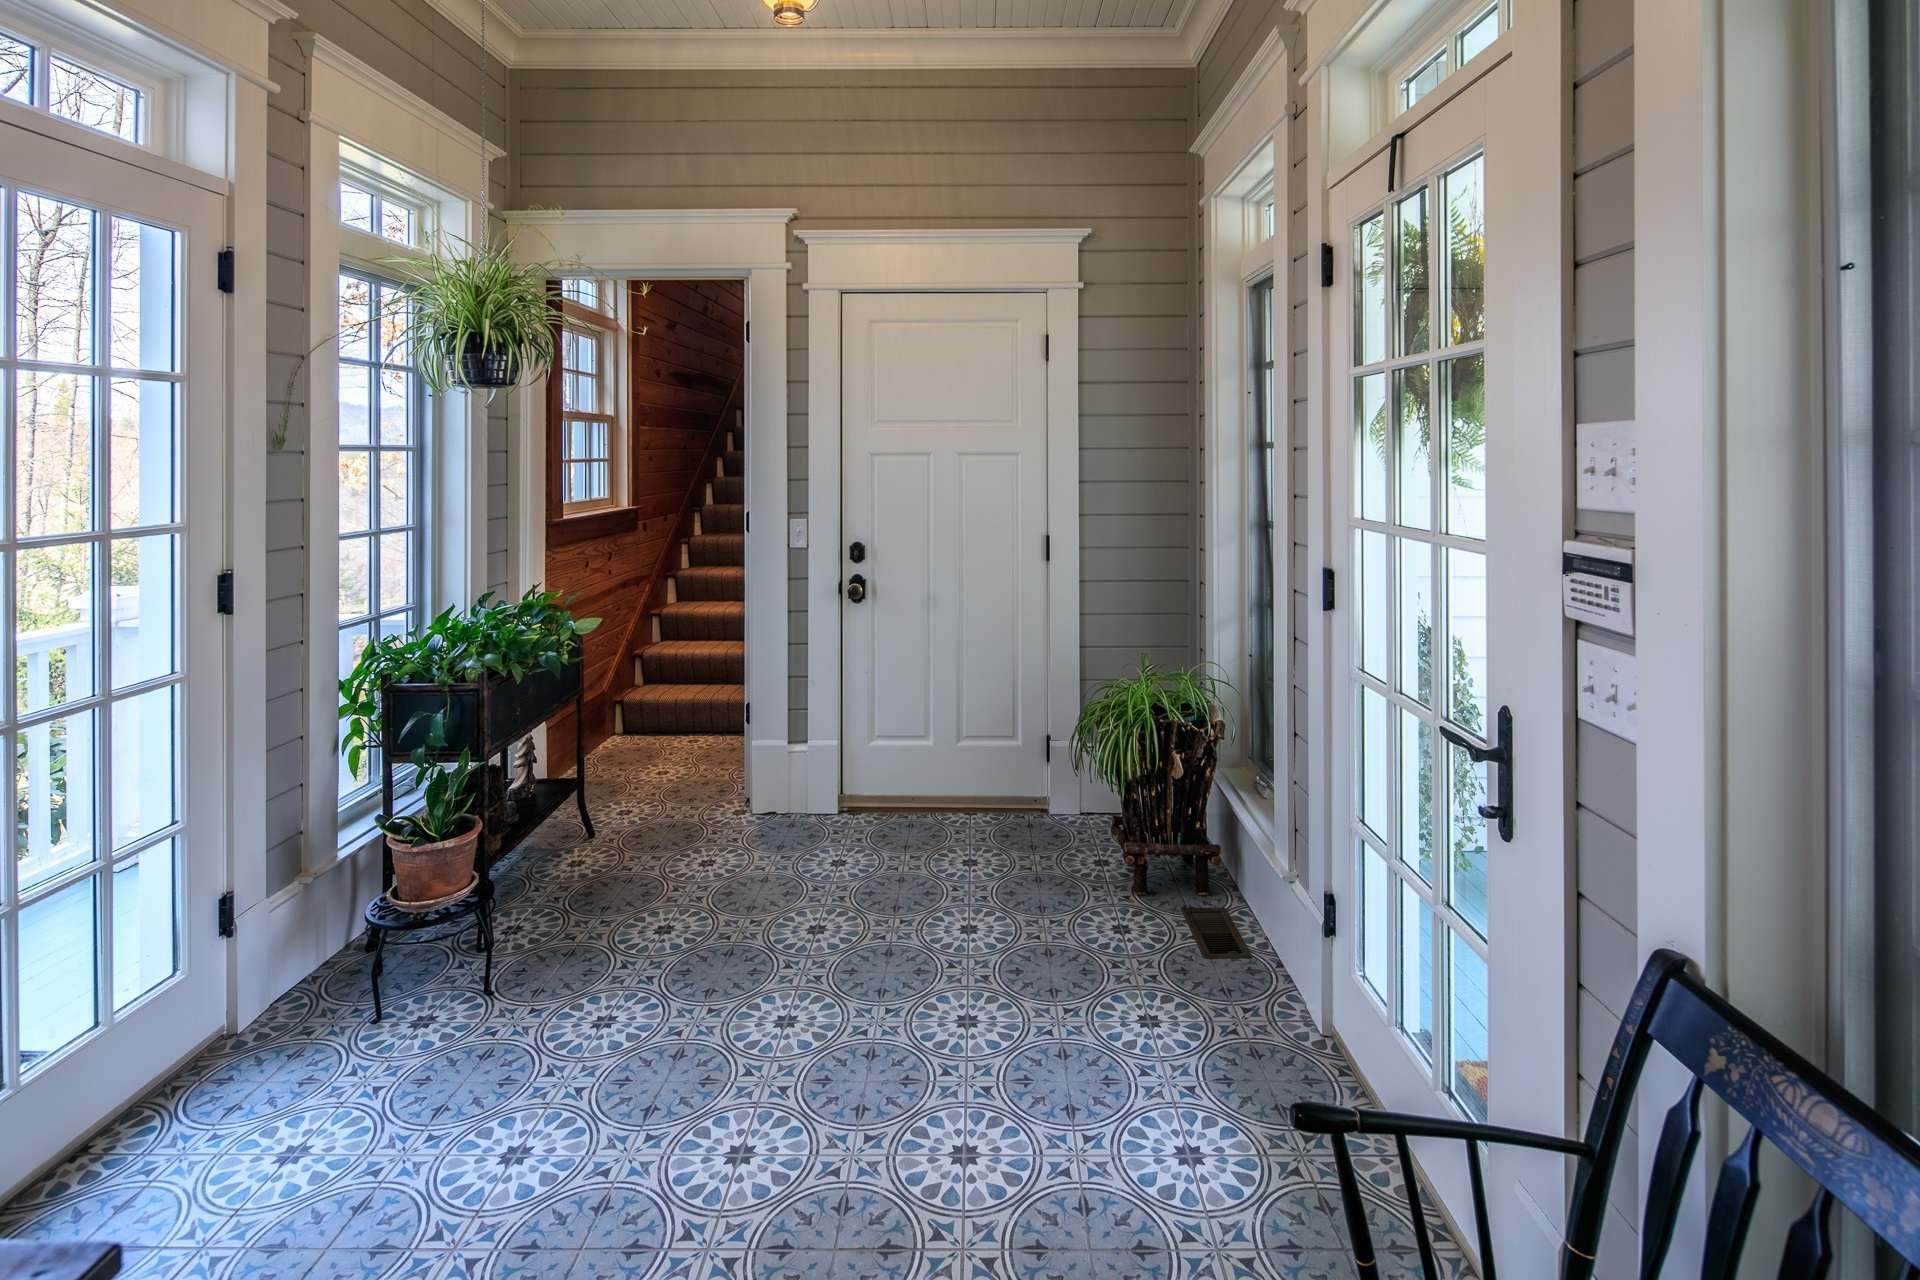 A large mudroom provides a more casual entrance, from both the front and back of the home, and also access to the spacious bonus room over the garage.